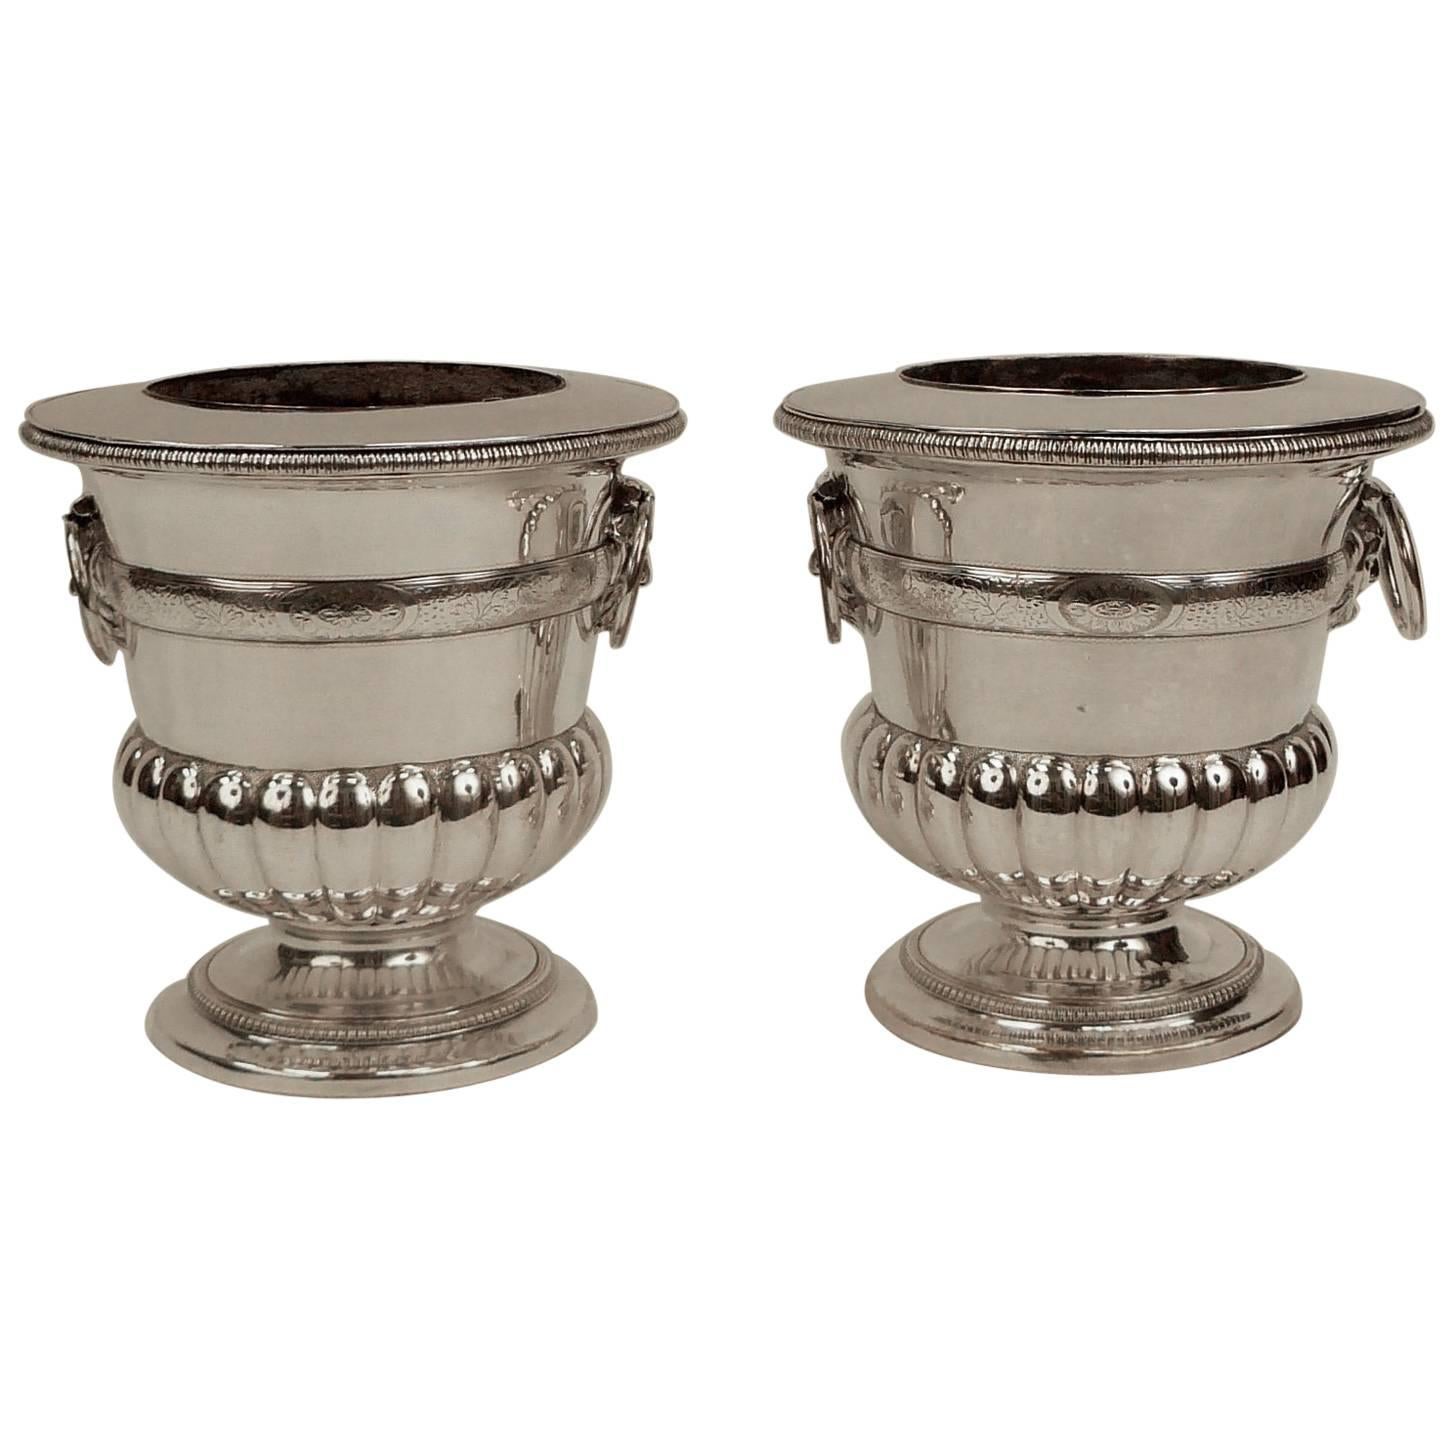 Pair of English George III Old Sheffield Plated Wine Coolers, circa 1790 For Sale